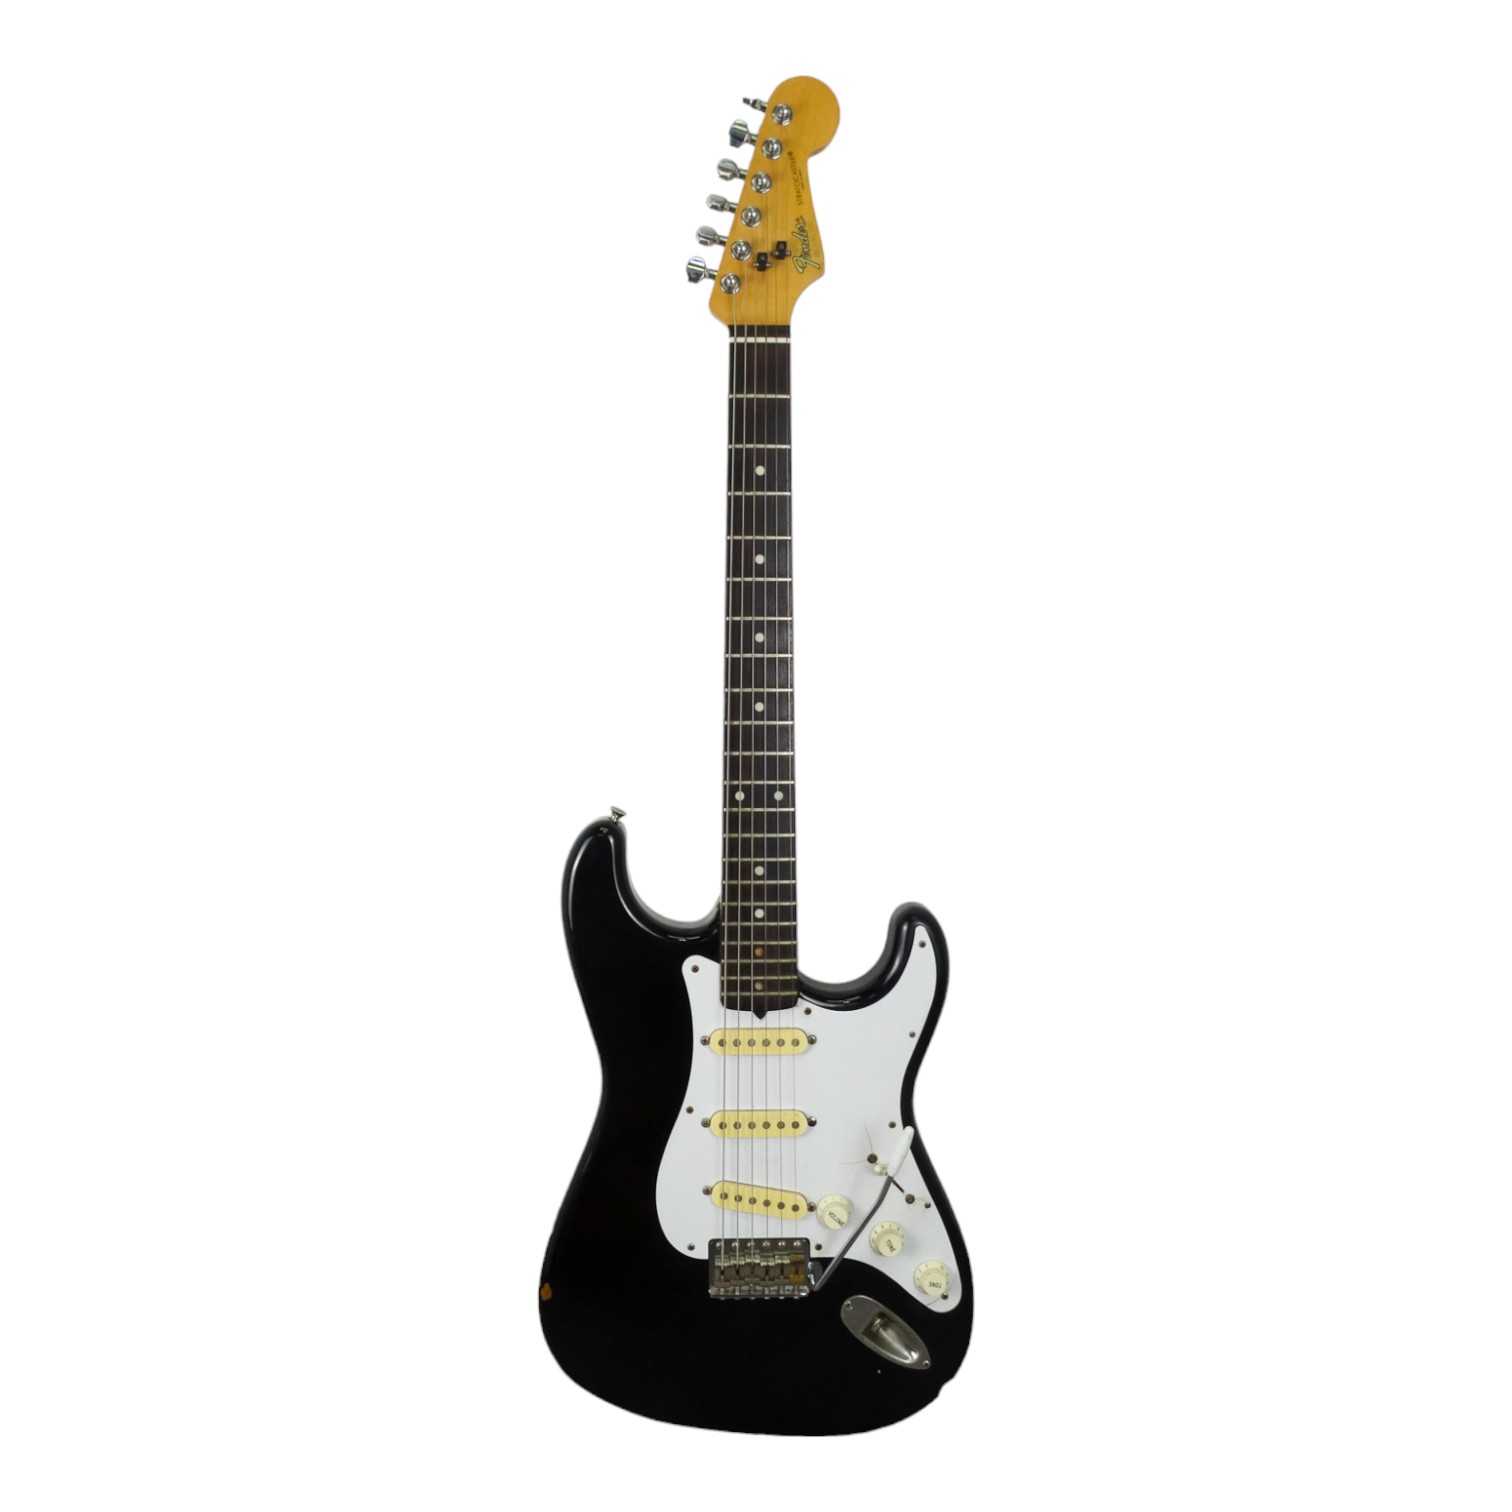 A Squires Stratocaster guitar made in Japan by Fender - with maple neck and rosewood fretboard, with